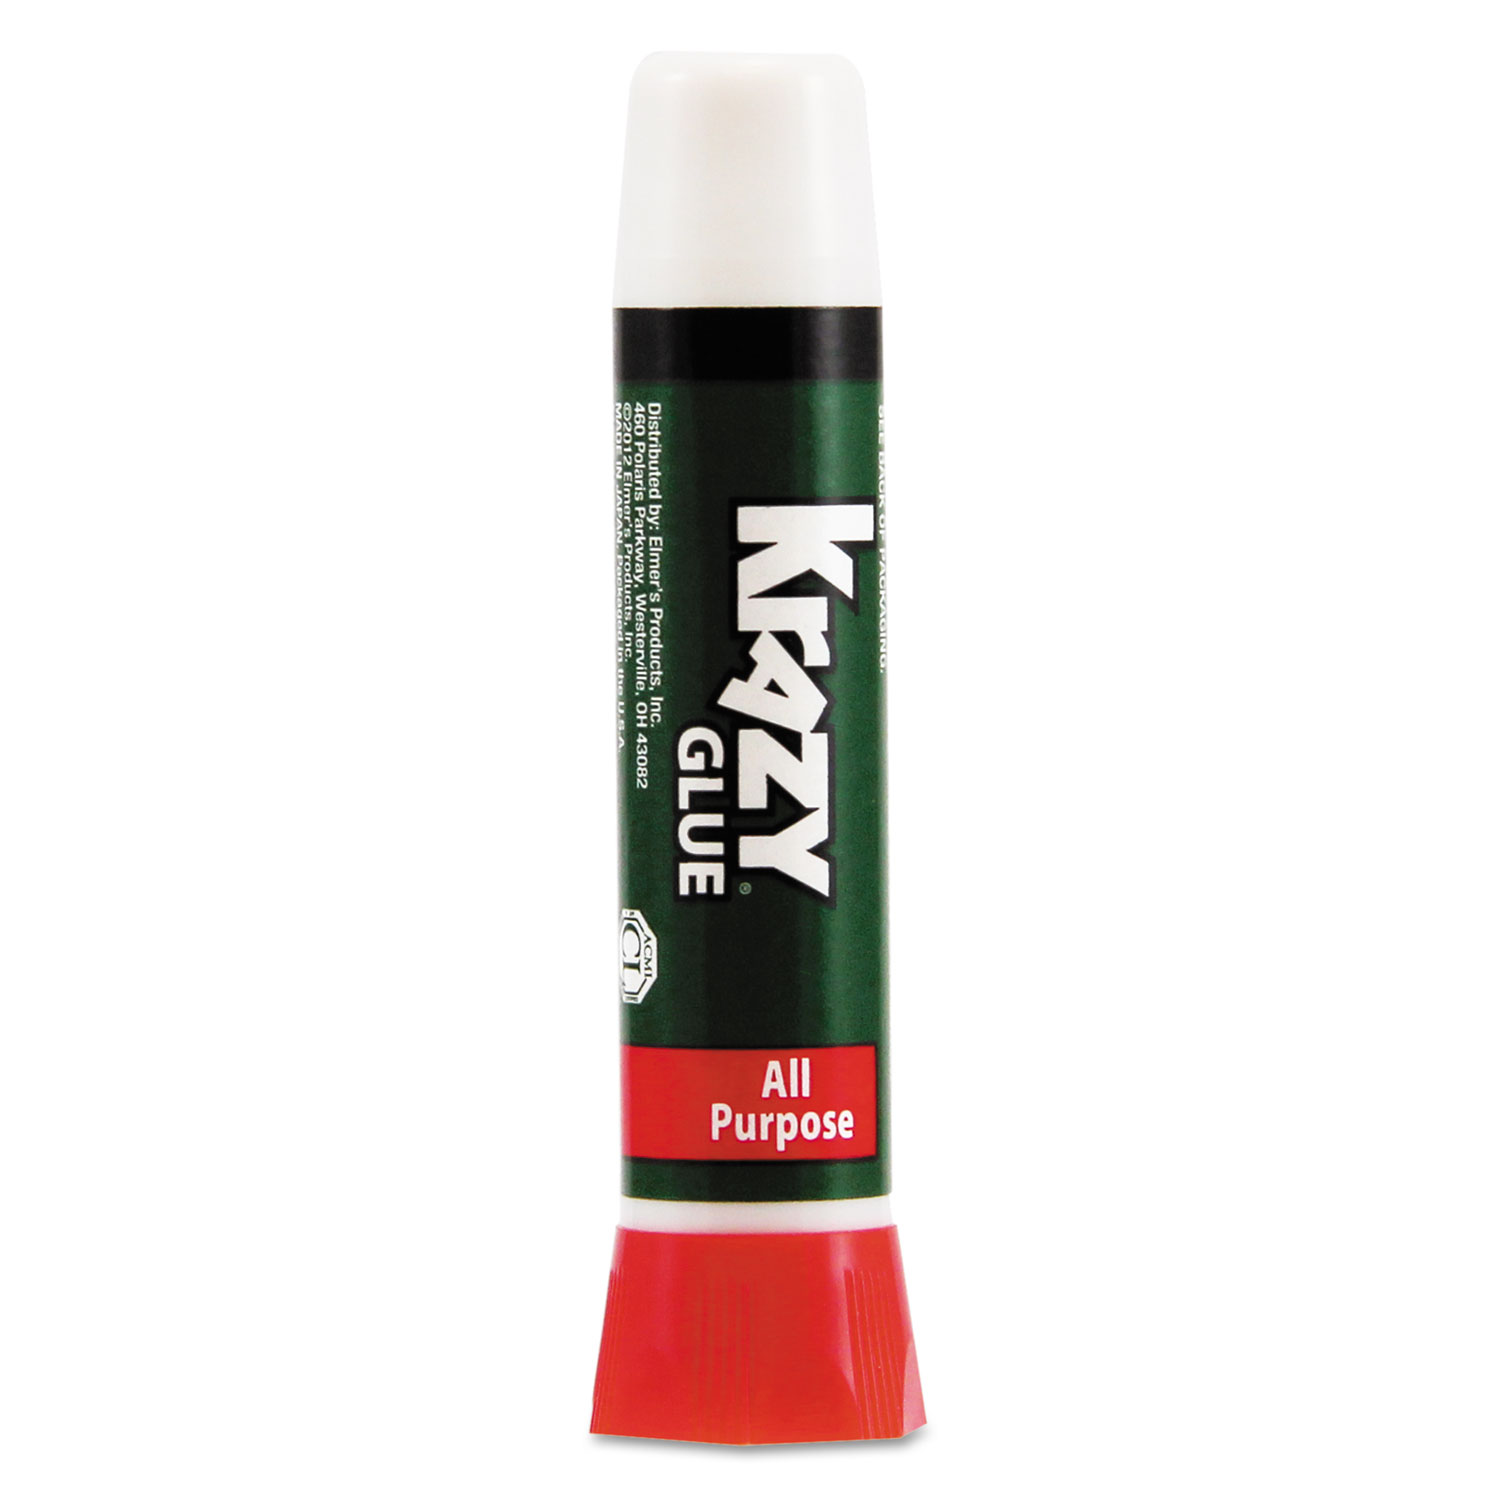 All Purpose Brush-On Krazy Glue, 0.17 oz, Dries Clear - BOSS